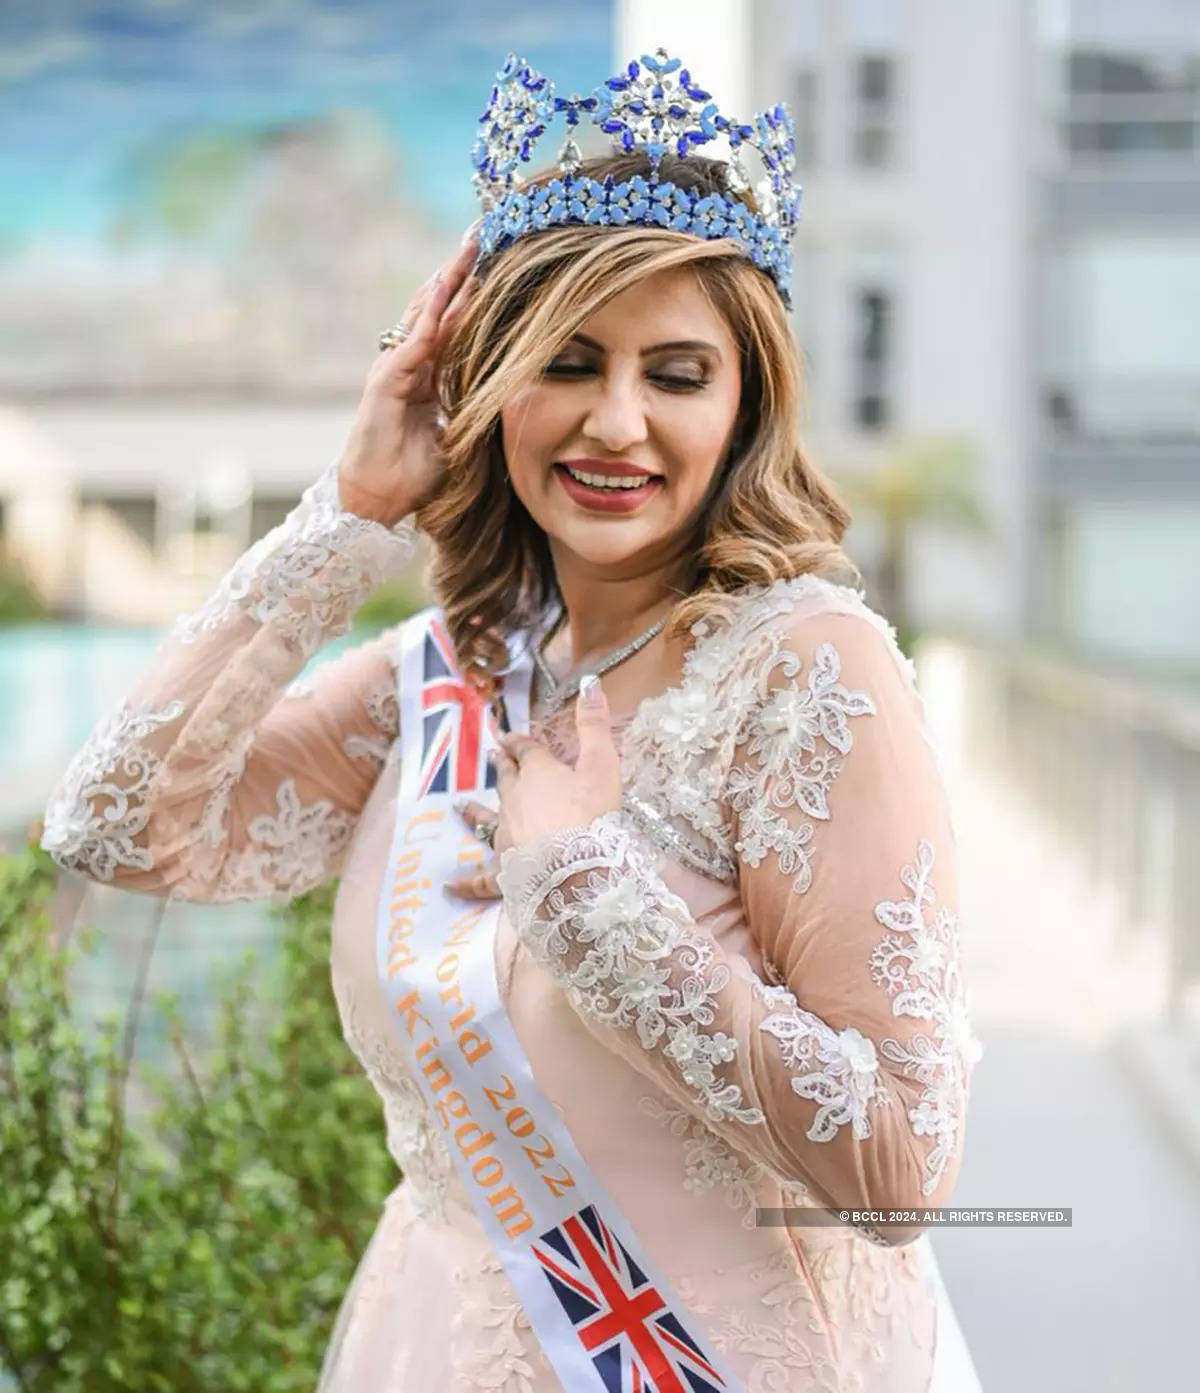 TedX Speaker and Winner of Mrs. World 2022: Dr. Parin Somani Wins the Heart of Global Society by her Inspirational Words